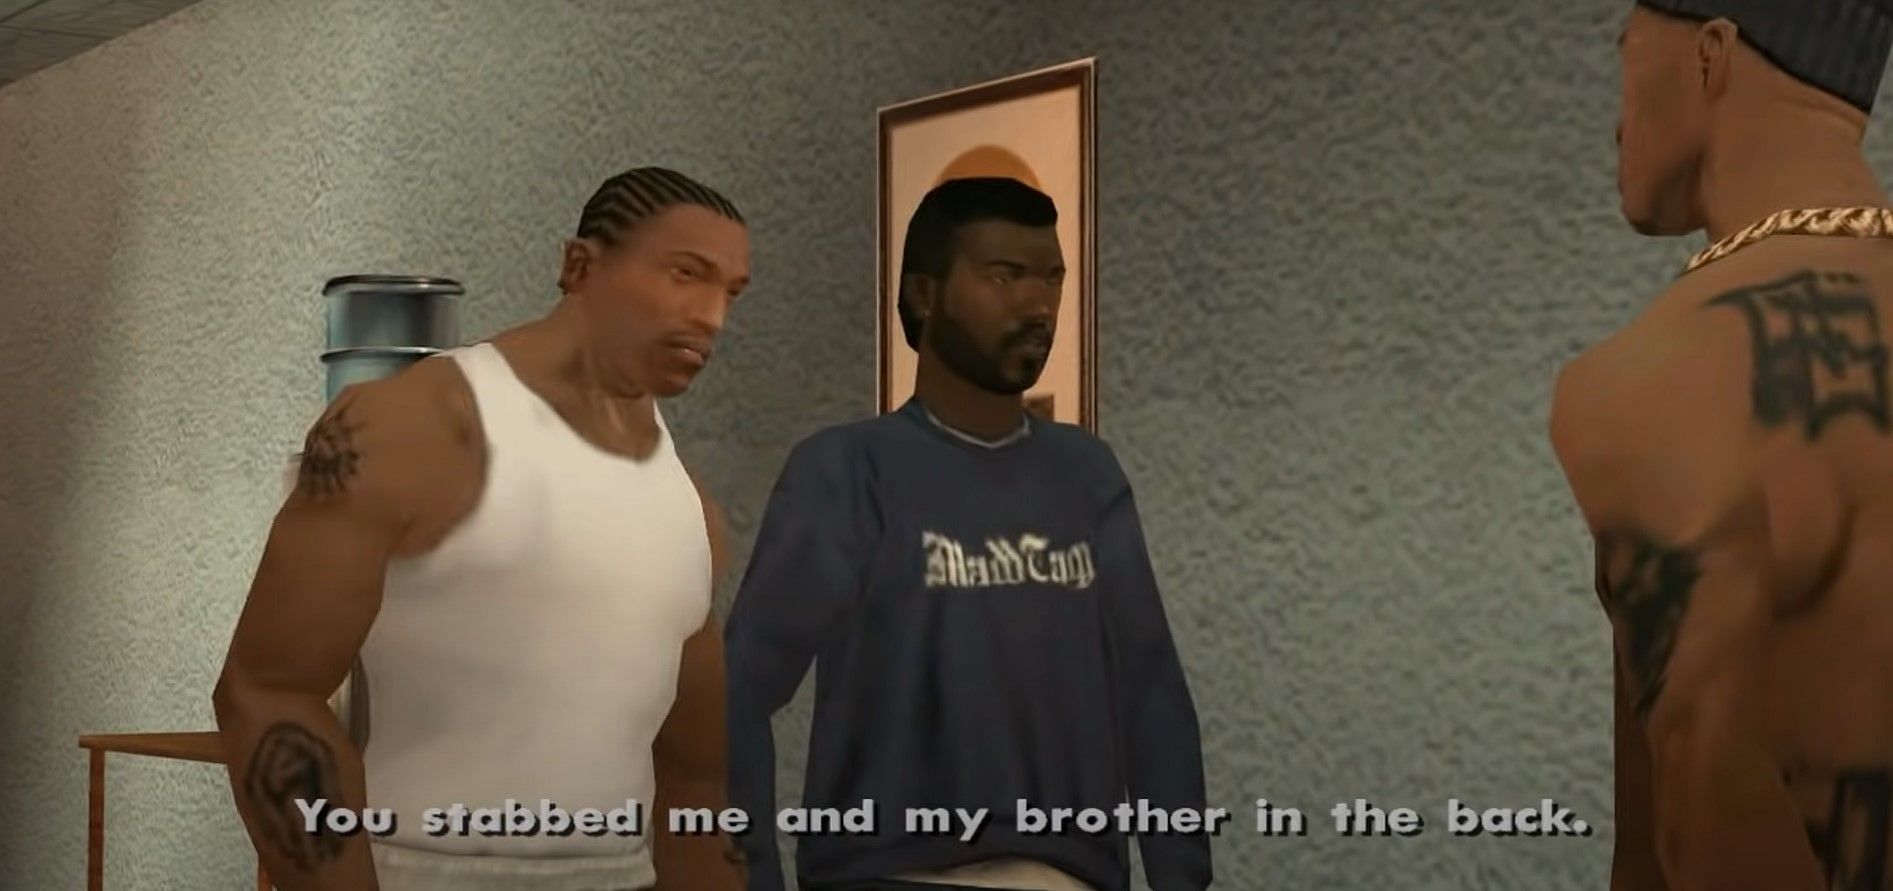 CJ claims that OG Loc stabbed him and Sweet in the back (Image via Rockstar Games)